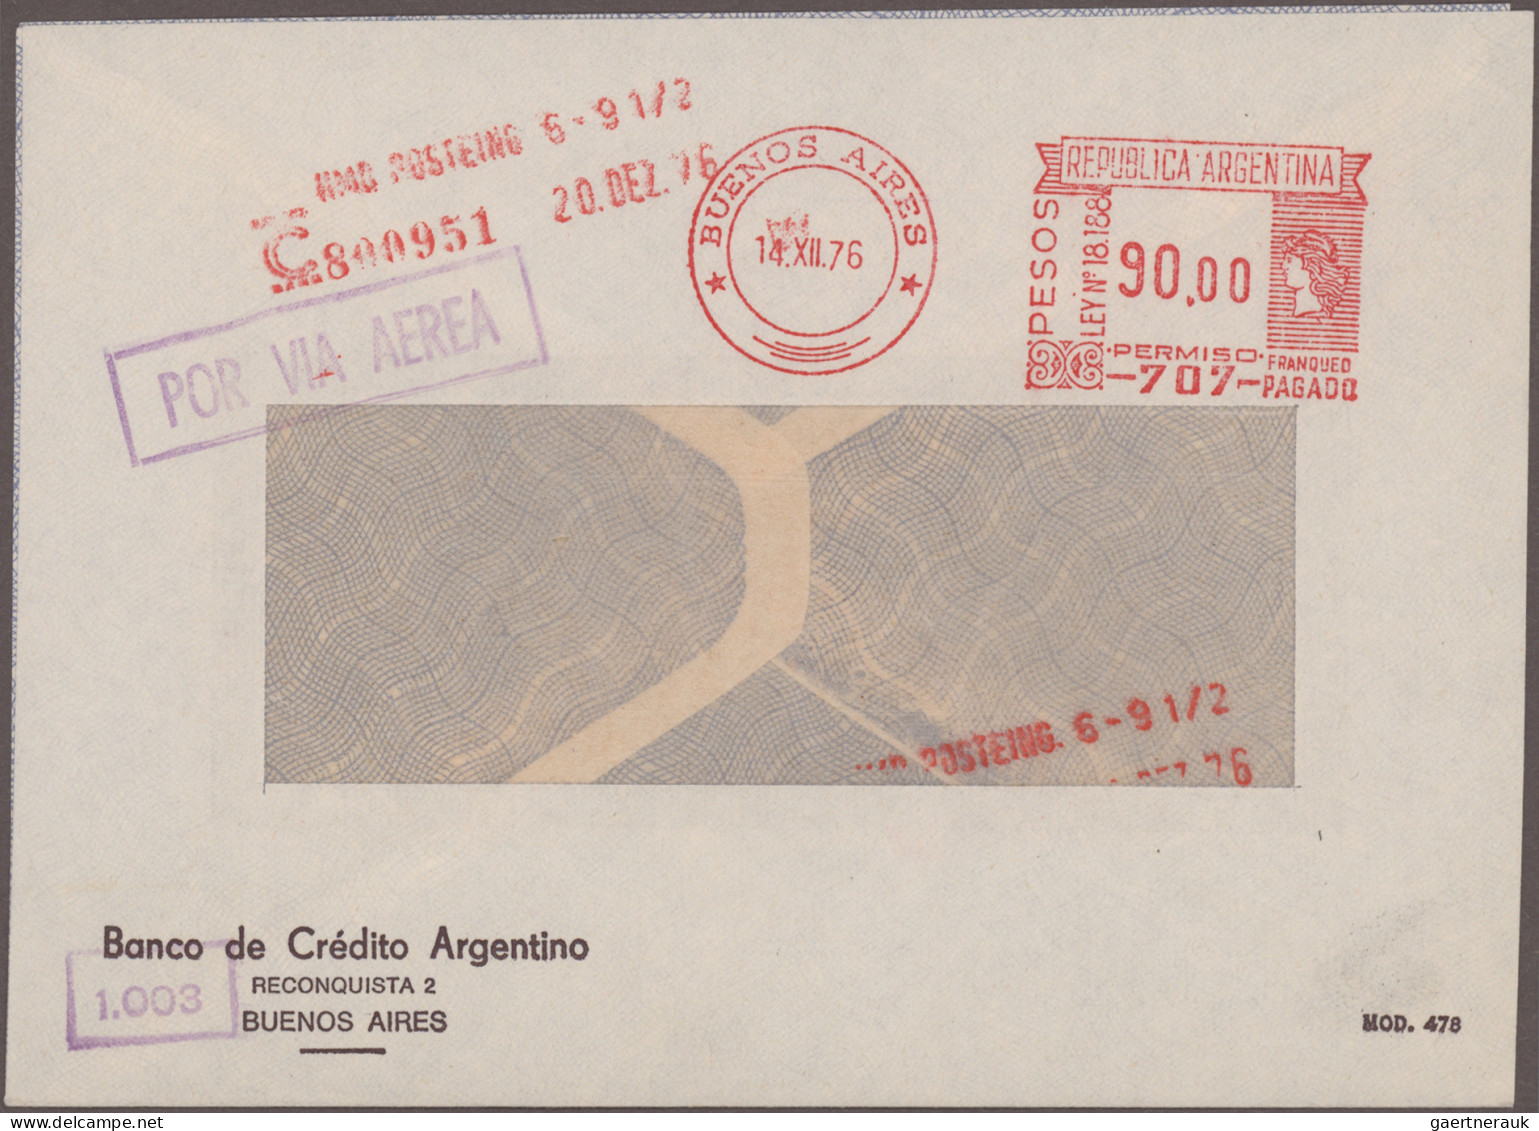 Argentina: 1928/1977, METER MARKS, assortment of apprx. 73 commercial covers mai